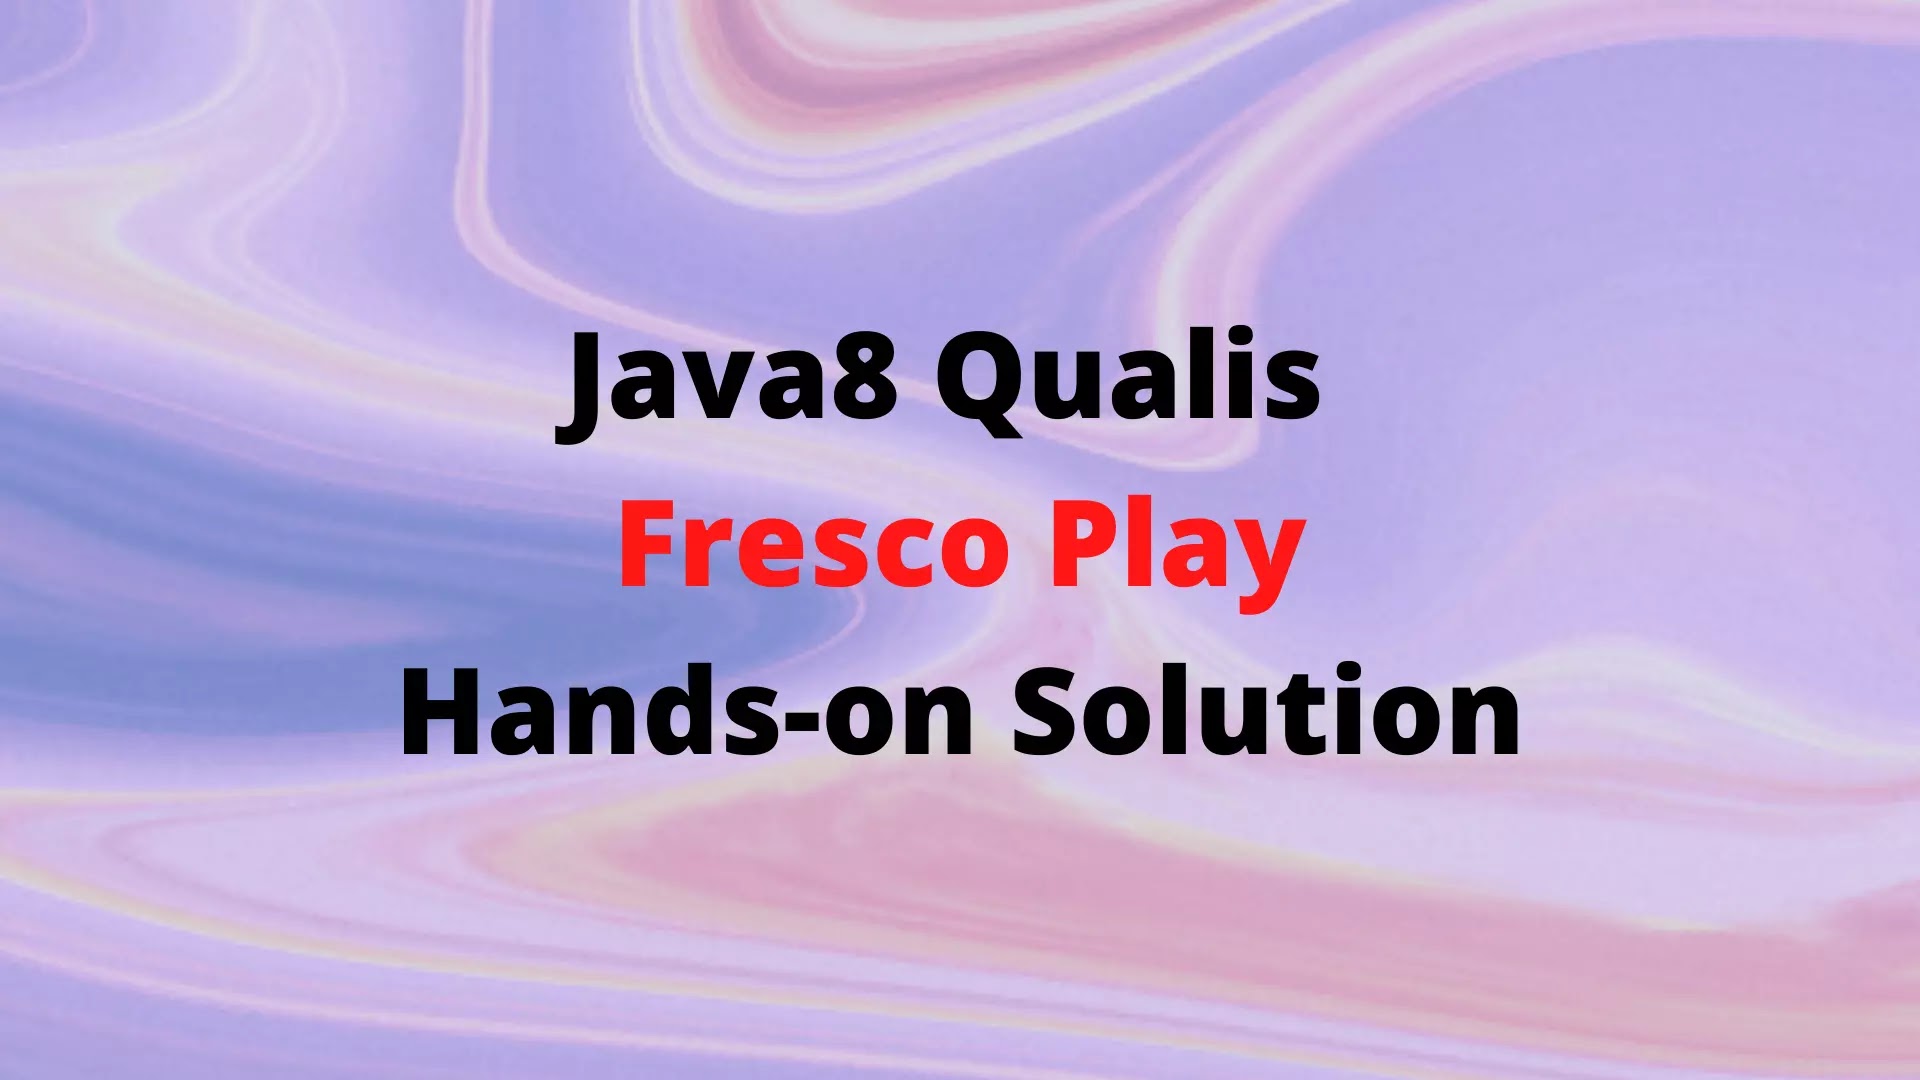 Java8 Qualis Hands-on Solution  |  TCS Fresco Play